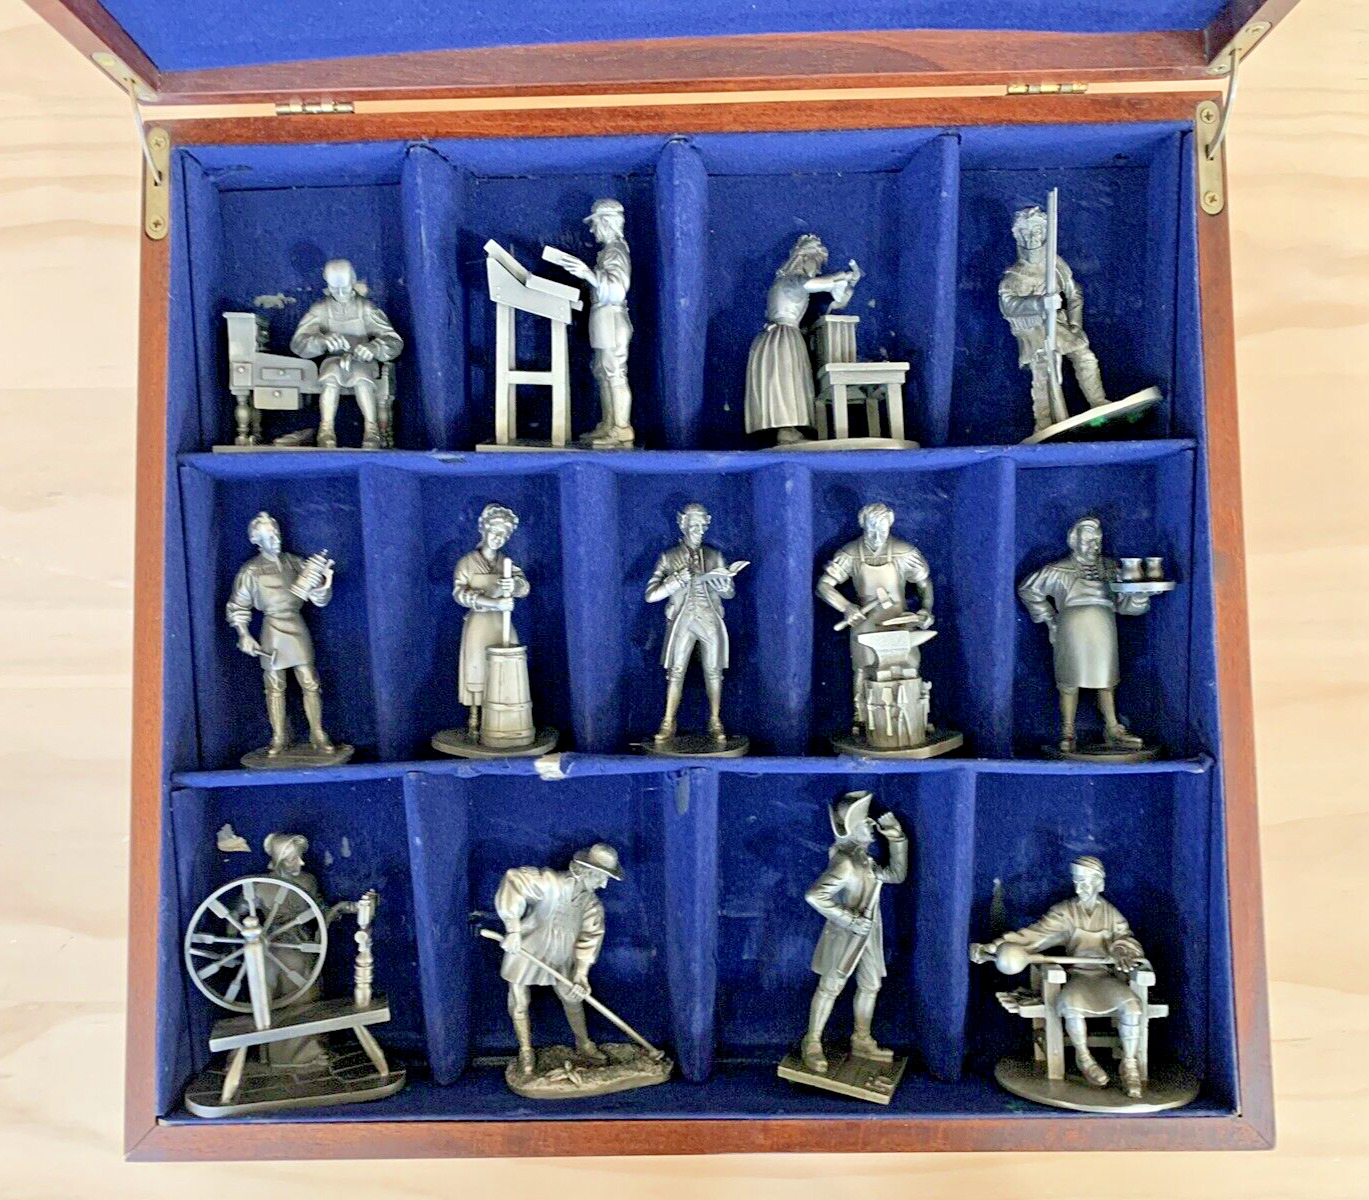 1975 Franklin Mint Pewter PEOPLE OF COLONIAL AMERICA (13) Figurines COMPLETE SET